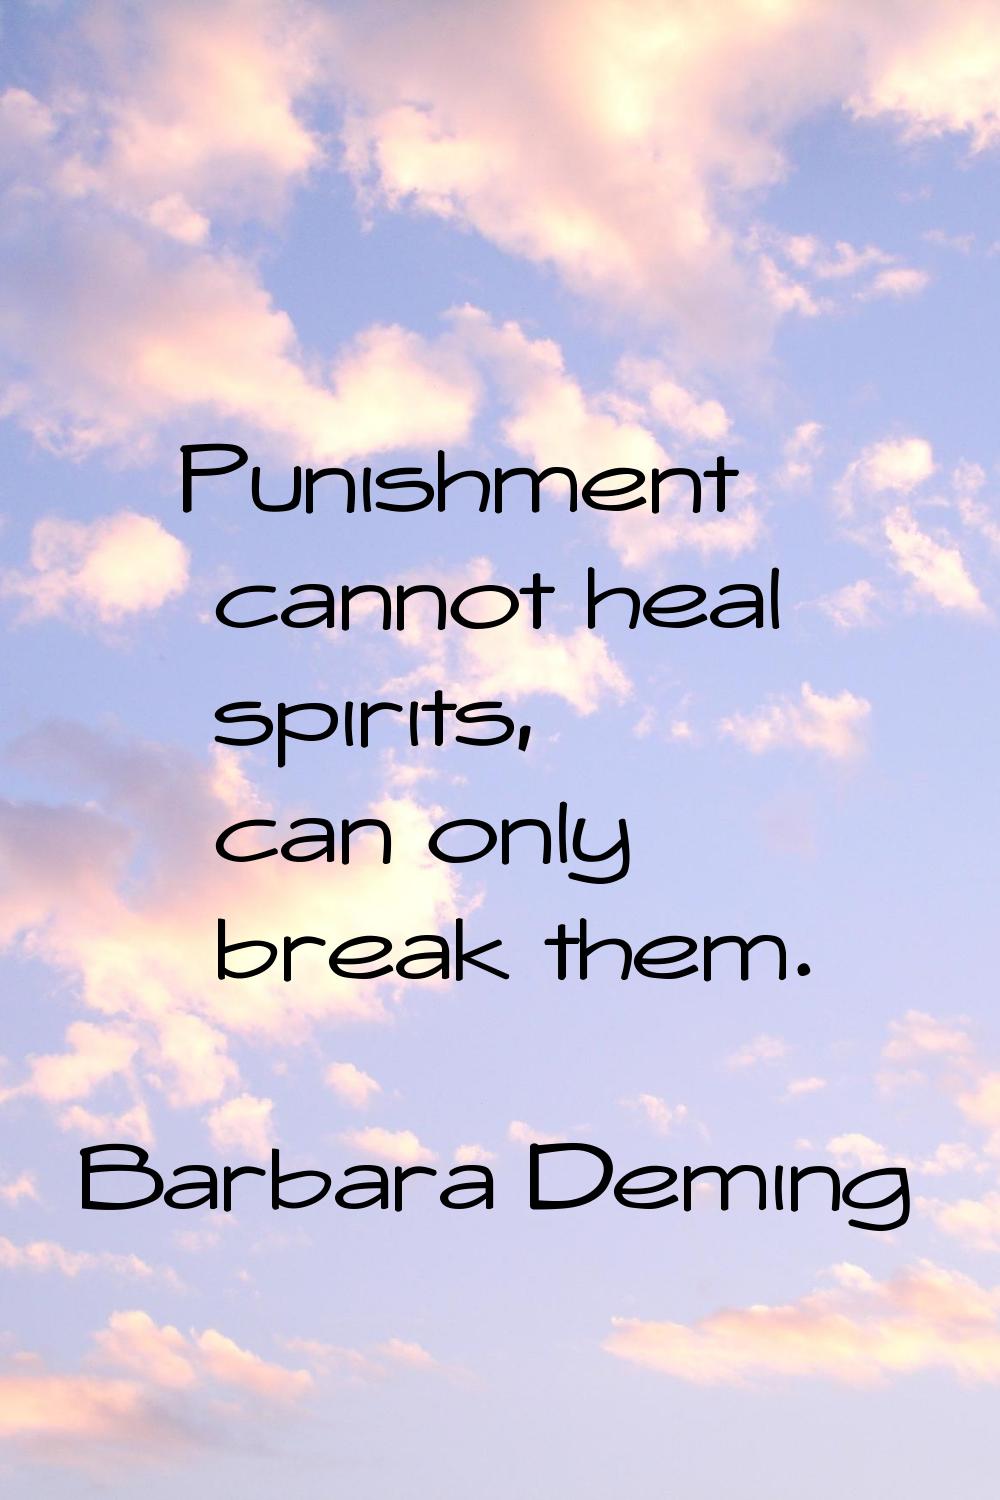 Punishment cannot heal spirits, can only break them.